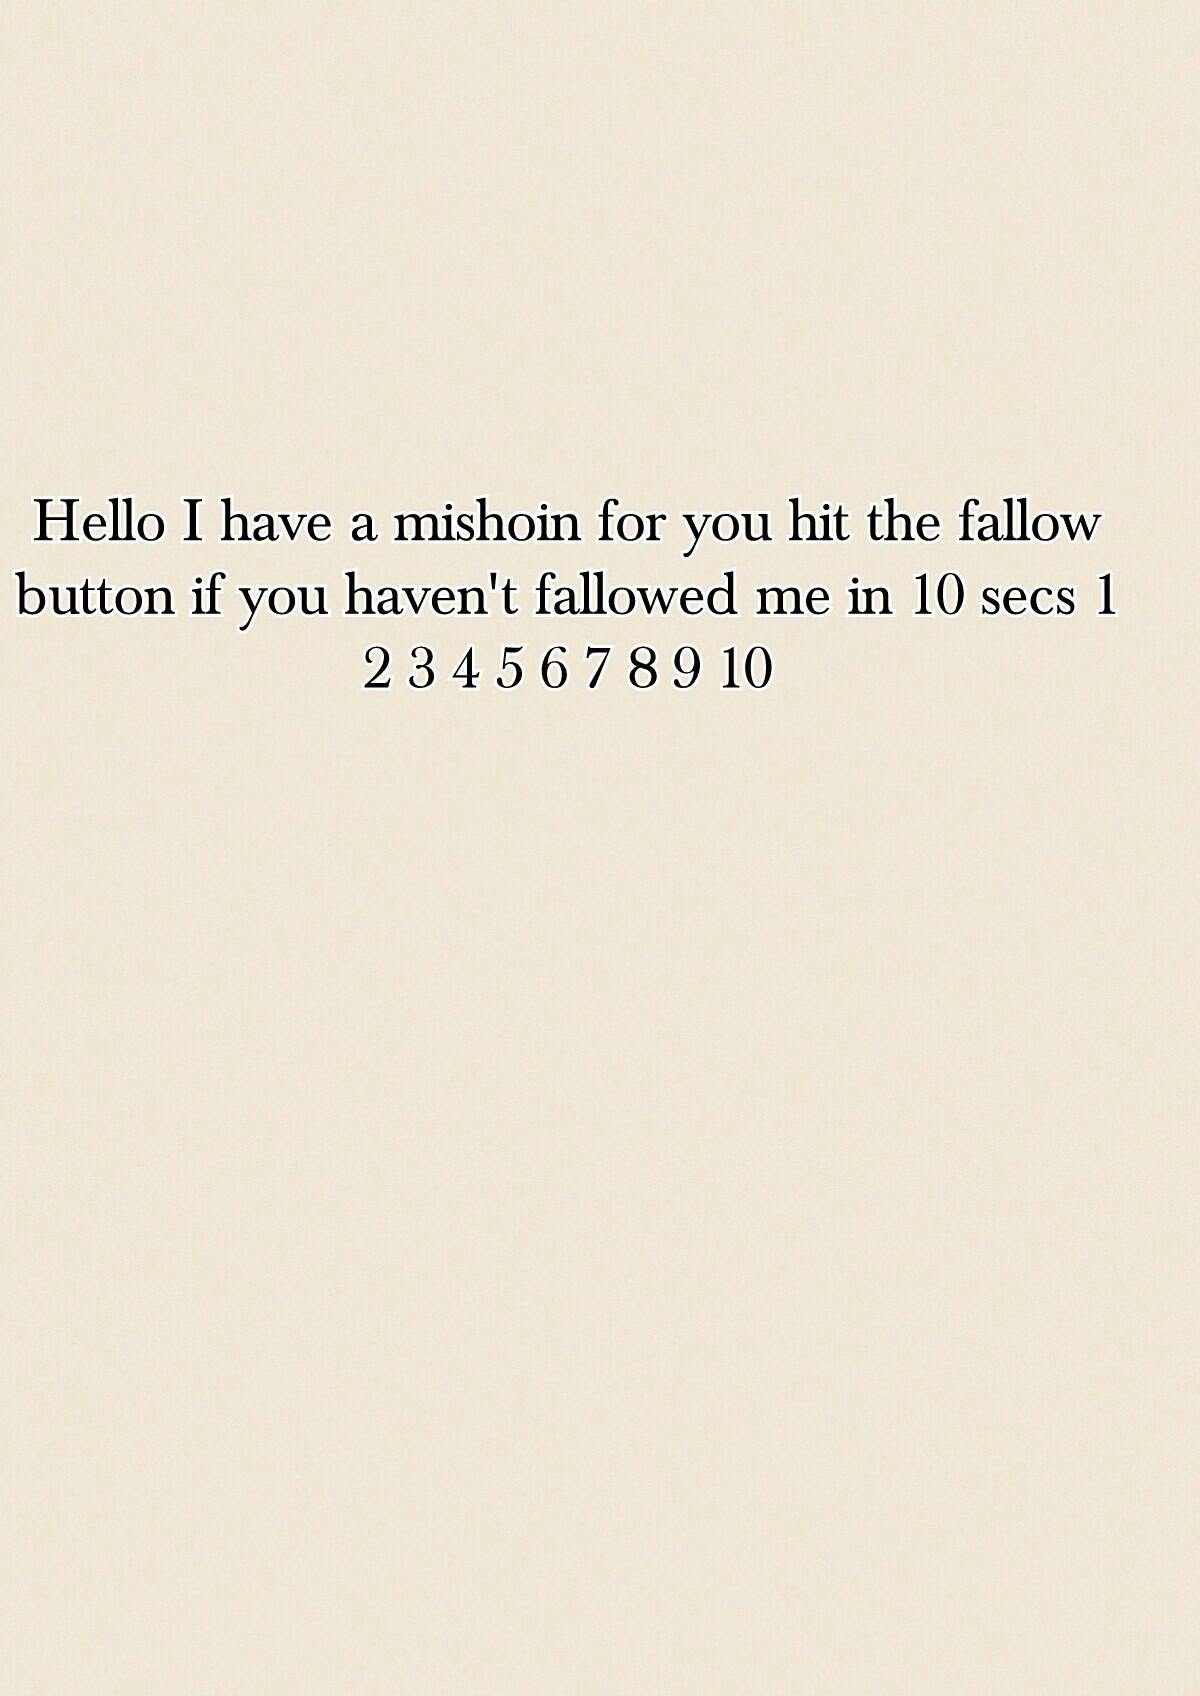 Hello I have a mishoin for you hit the fallow button if you haven't fallowed me in 10 secs 1 2 3 4 5 6 7 8 9 10